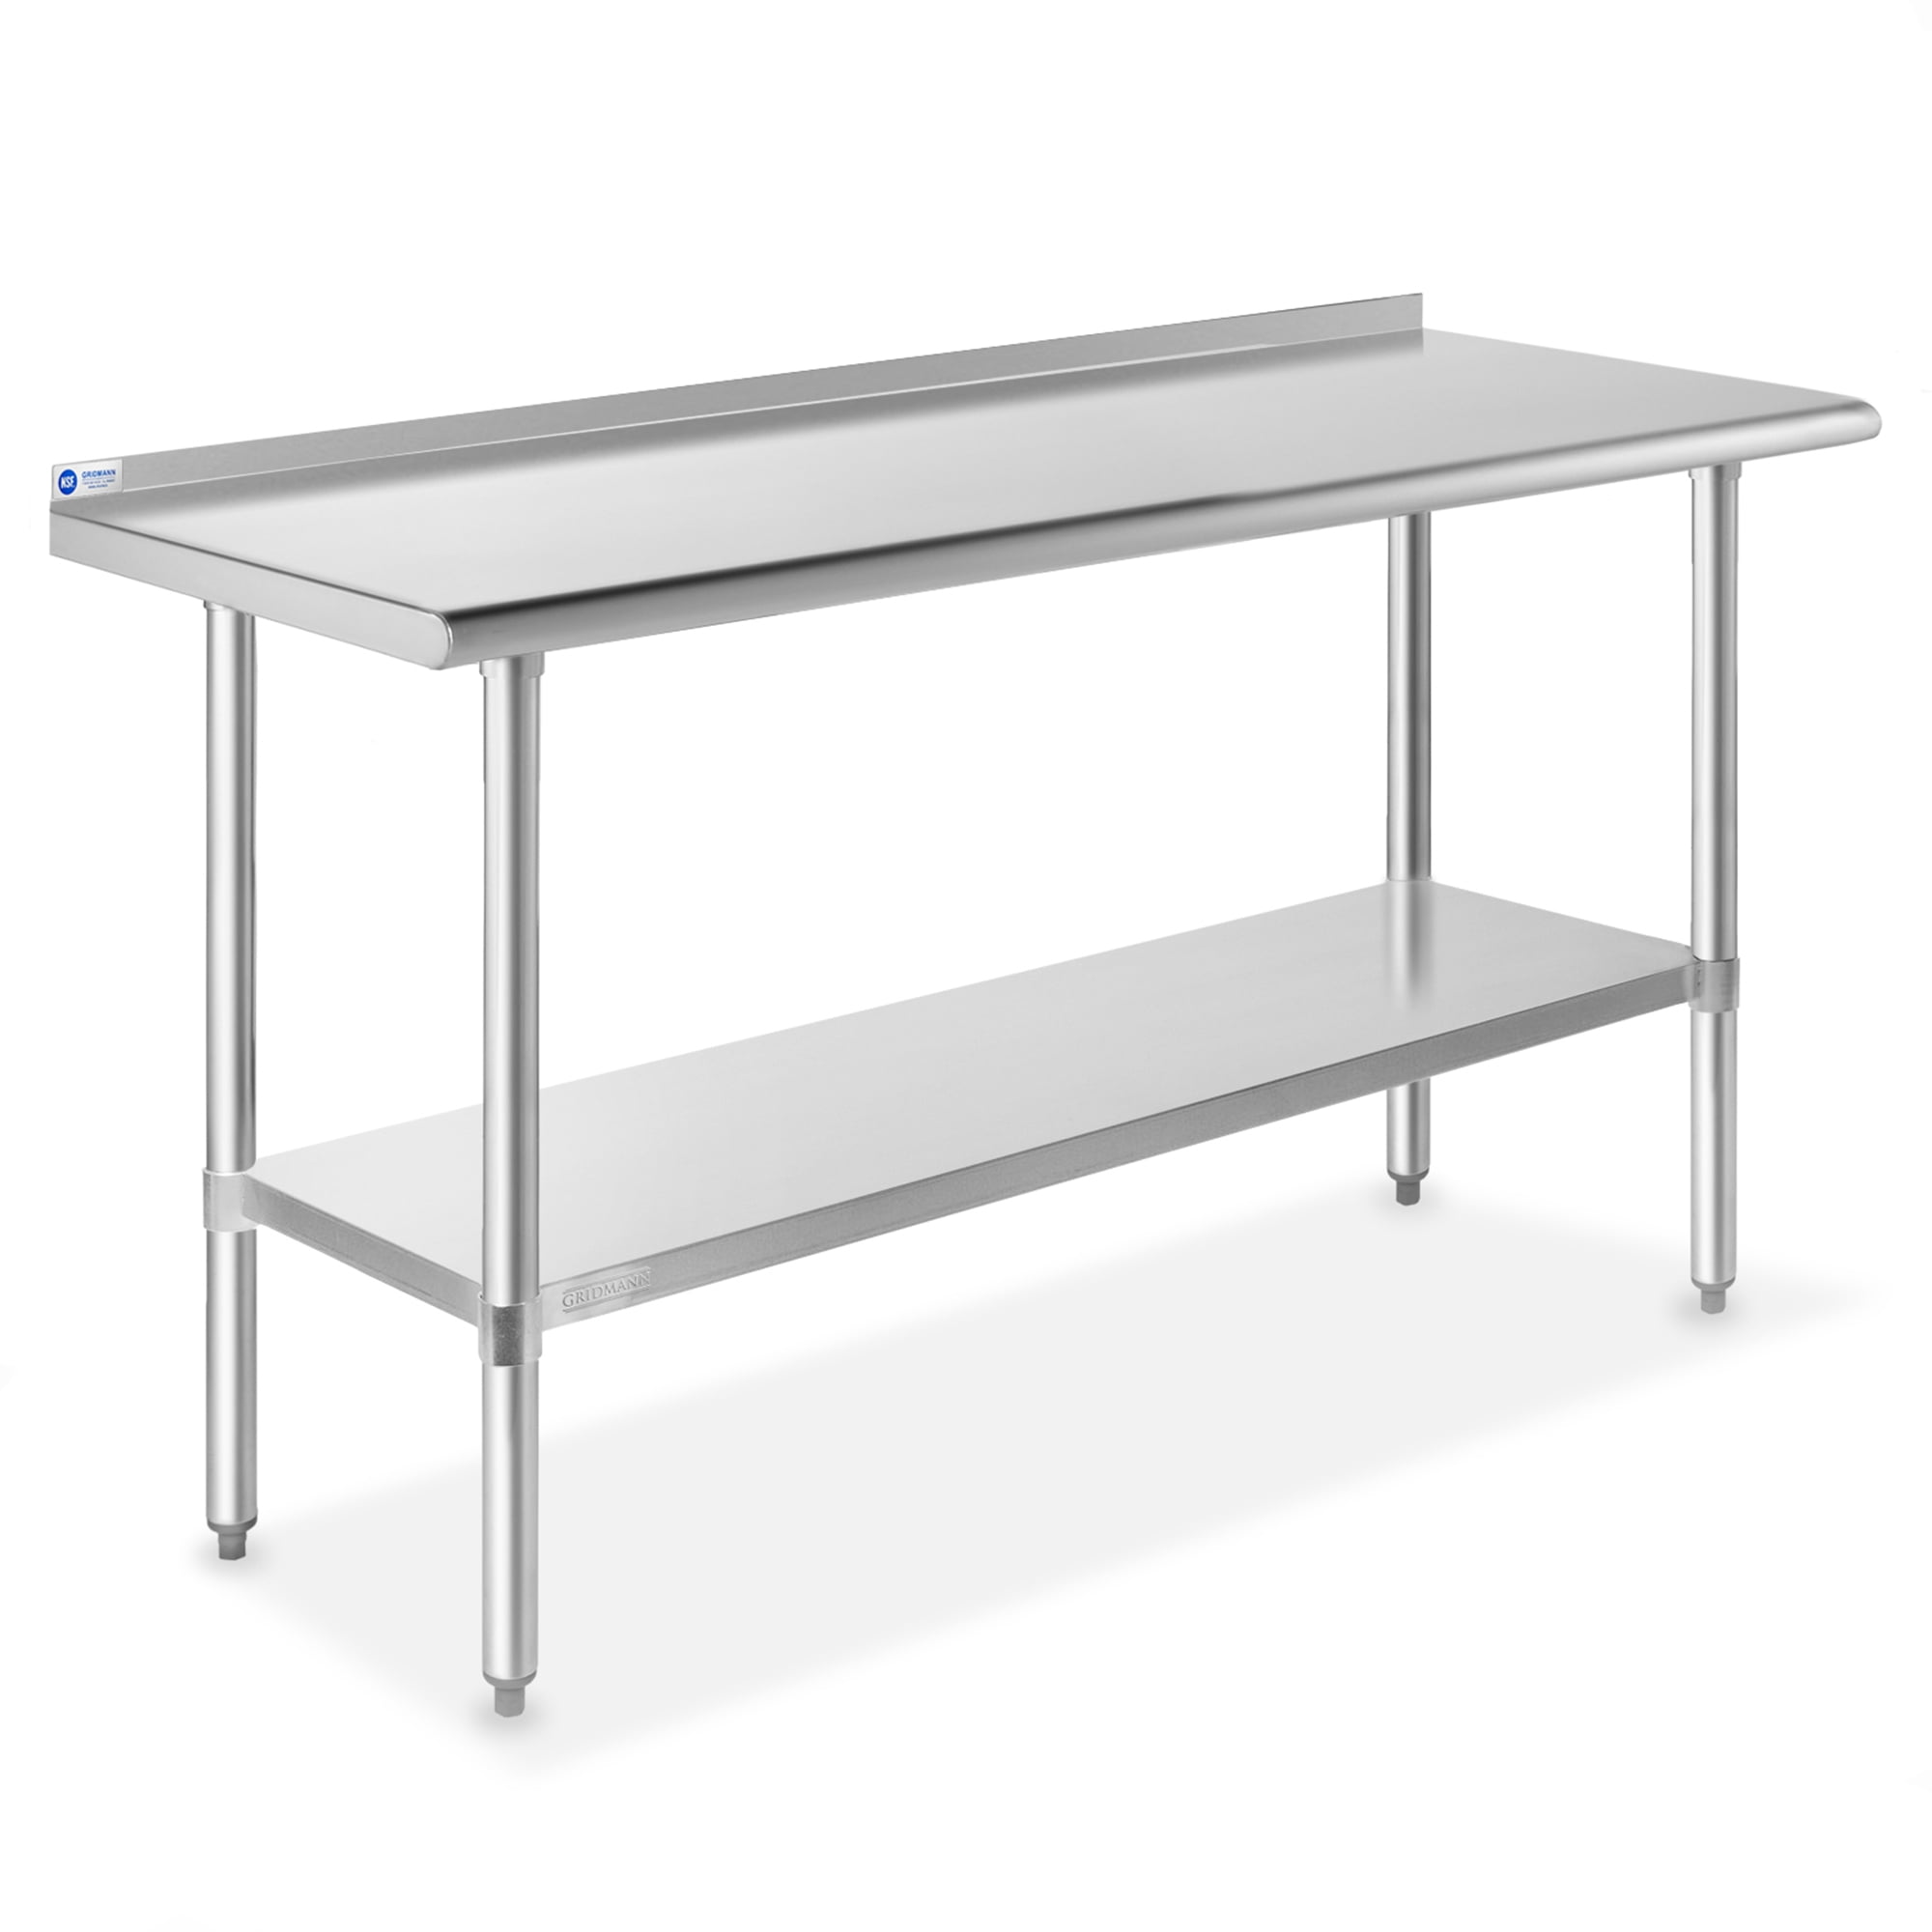 Wilprep Stainless Steel Kitchen Table Work Bench Meal Prep Station 35x24 in  440 lb,NSF Certified 